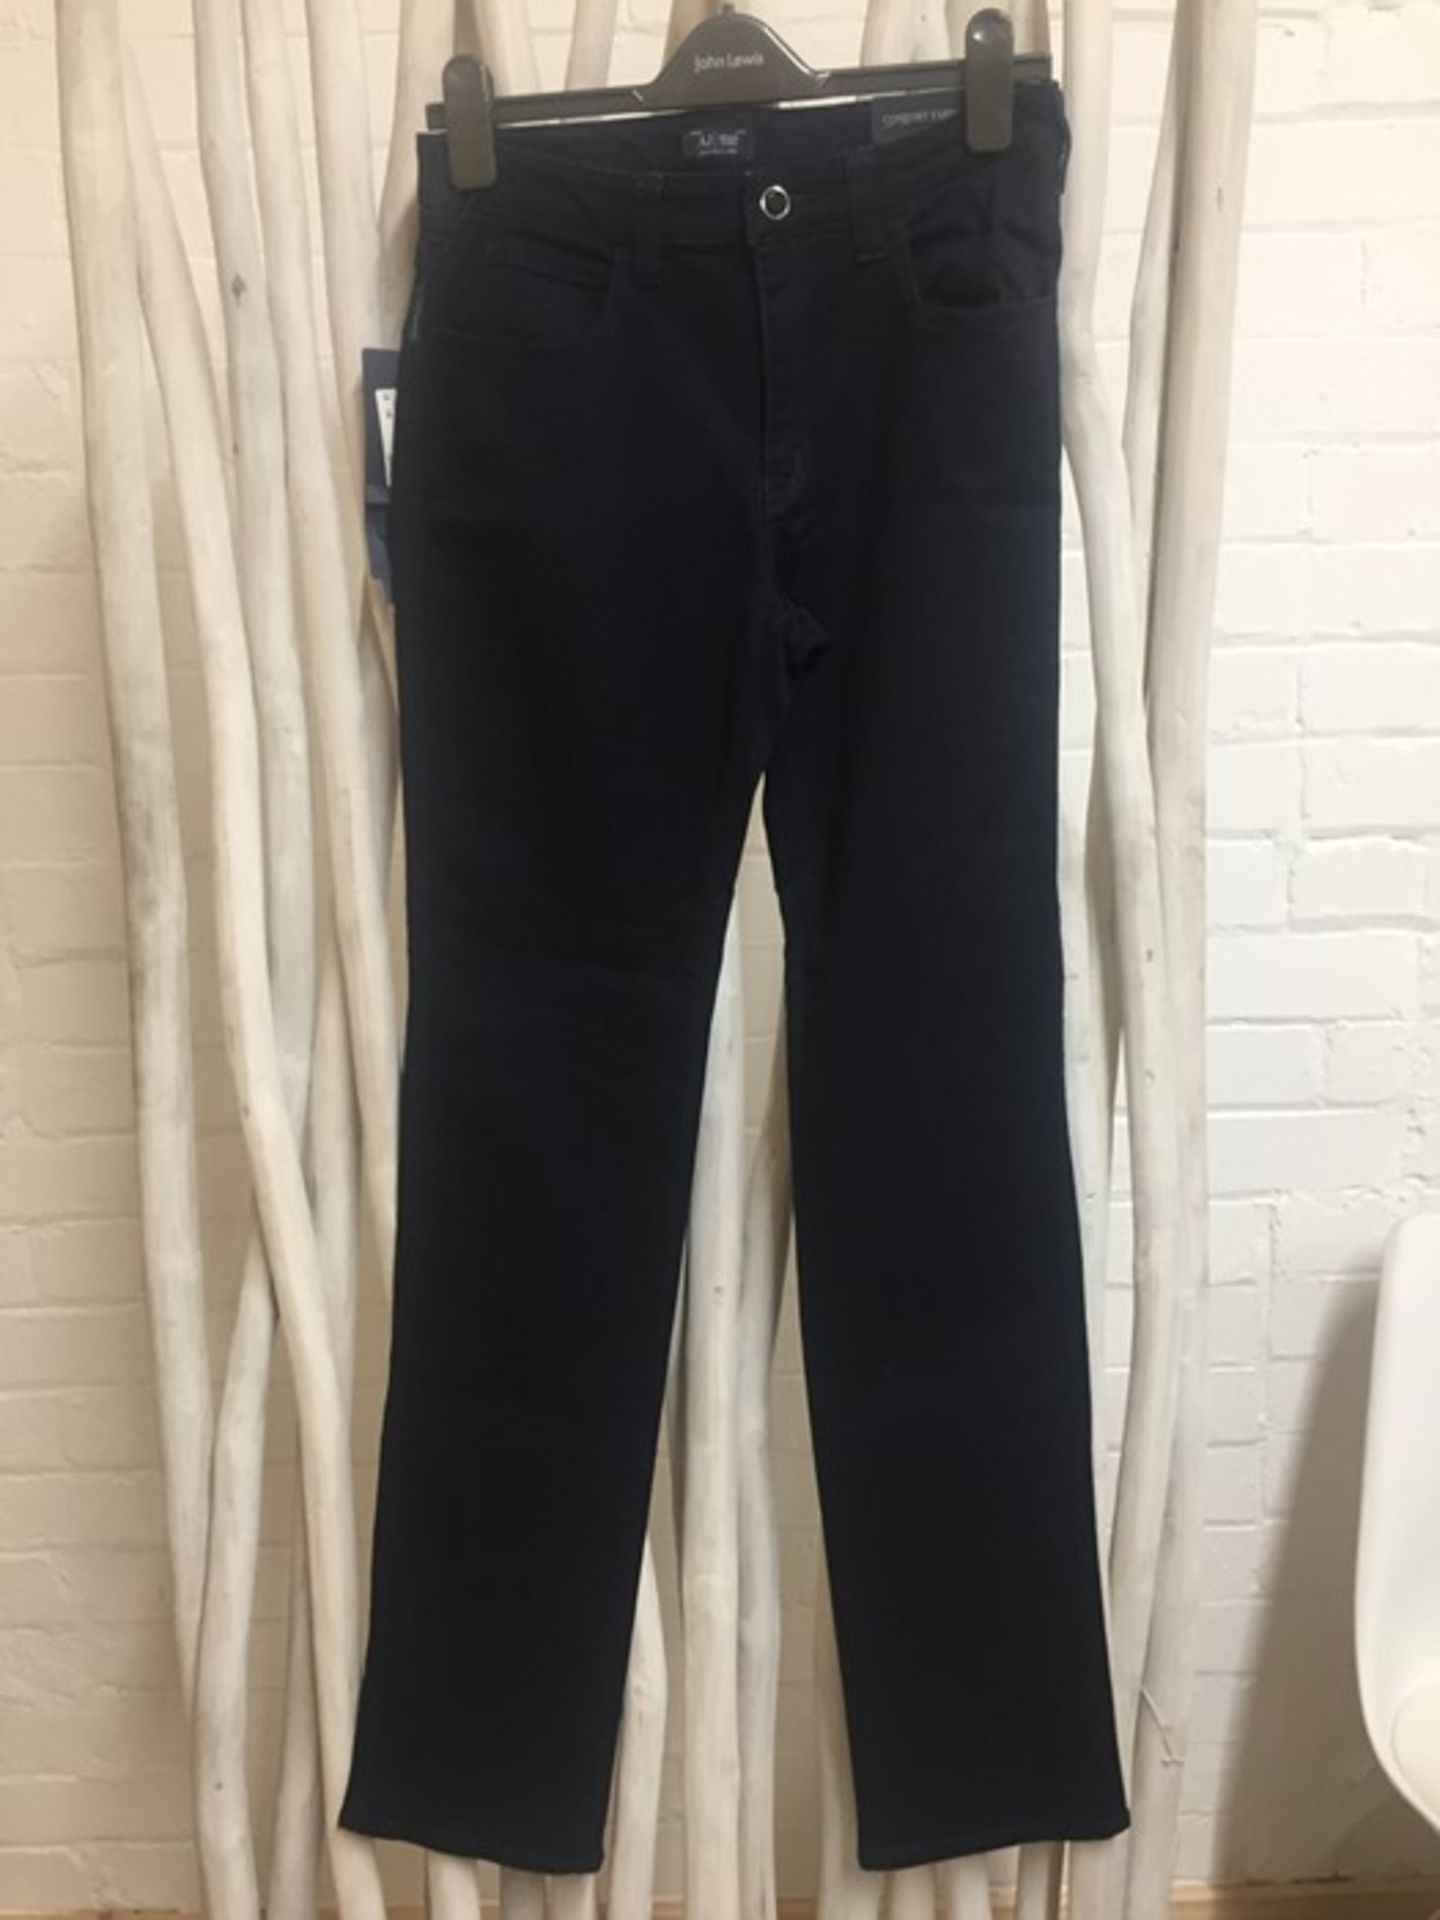 1 ARMANI JEANS REGULAR FIT J75 DENIM JEANS IN W30 / RRP £145.00 (PUBLIC VIEWING AVAILABLE)